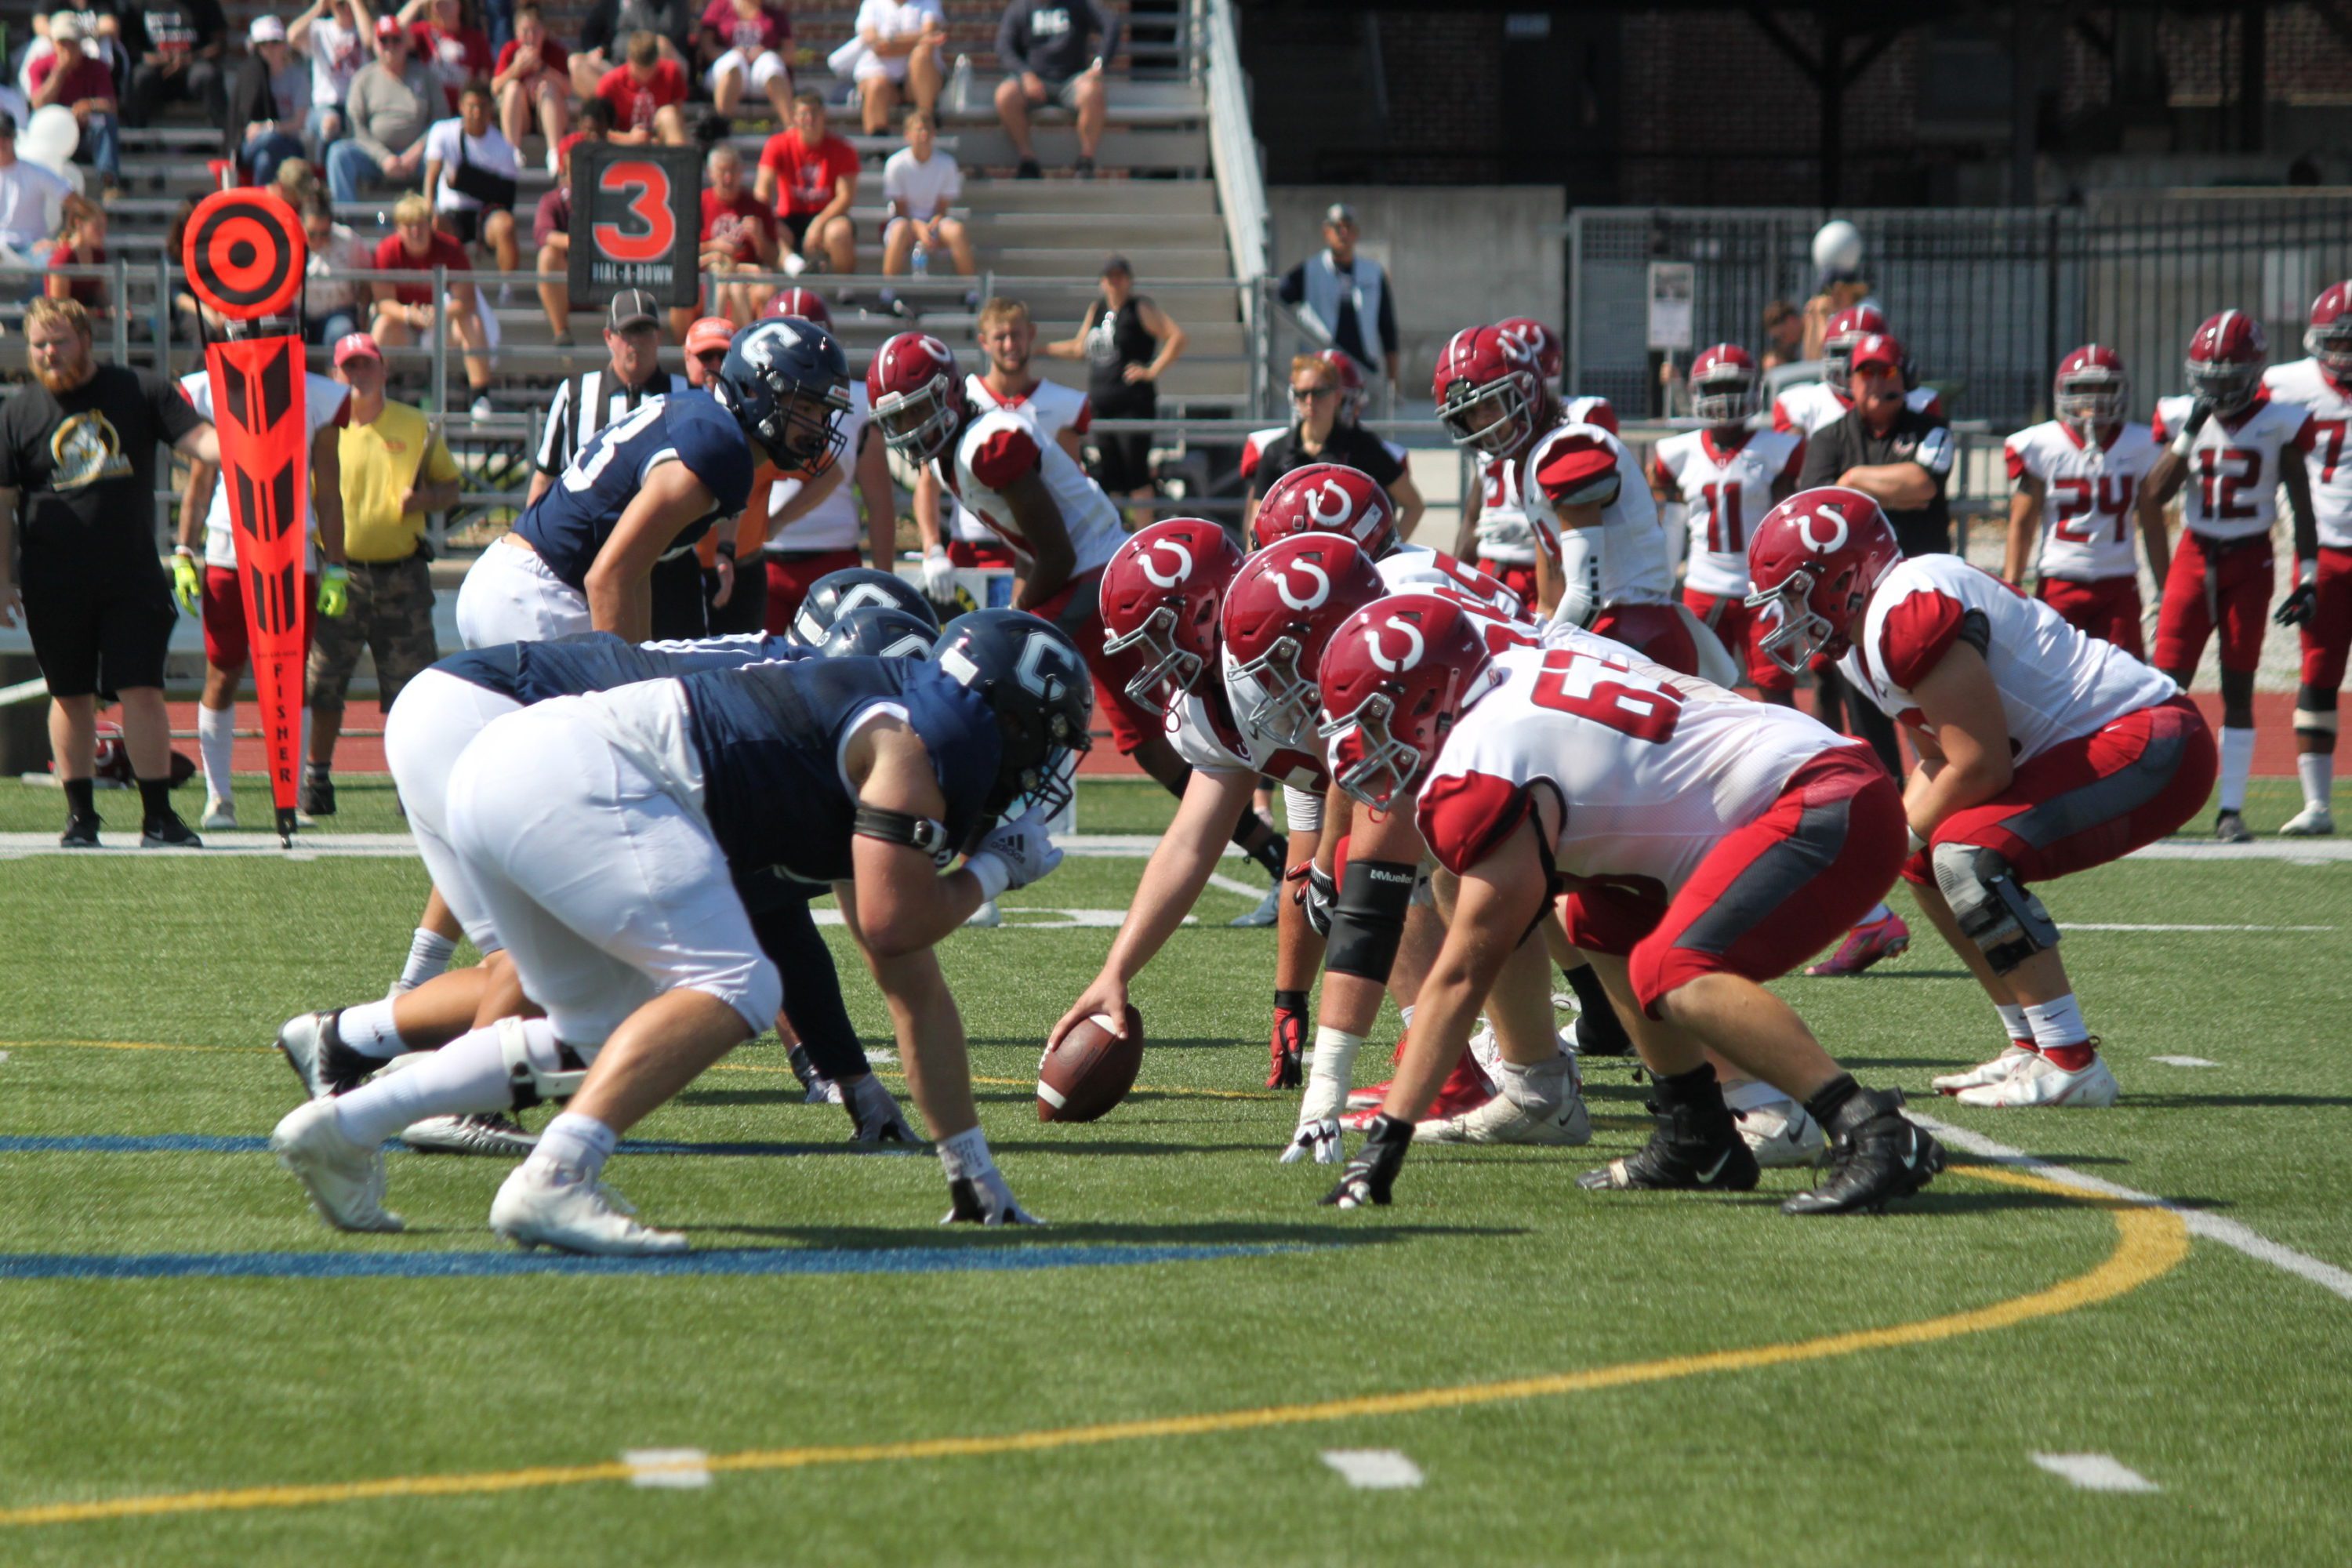 Bulldogs Football Team Narrowly Loses Homecoming Game | The Sower Newspaper